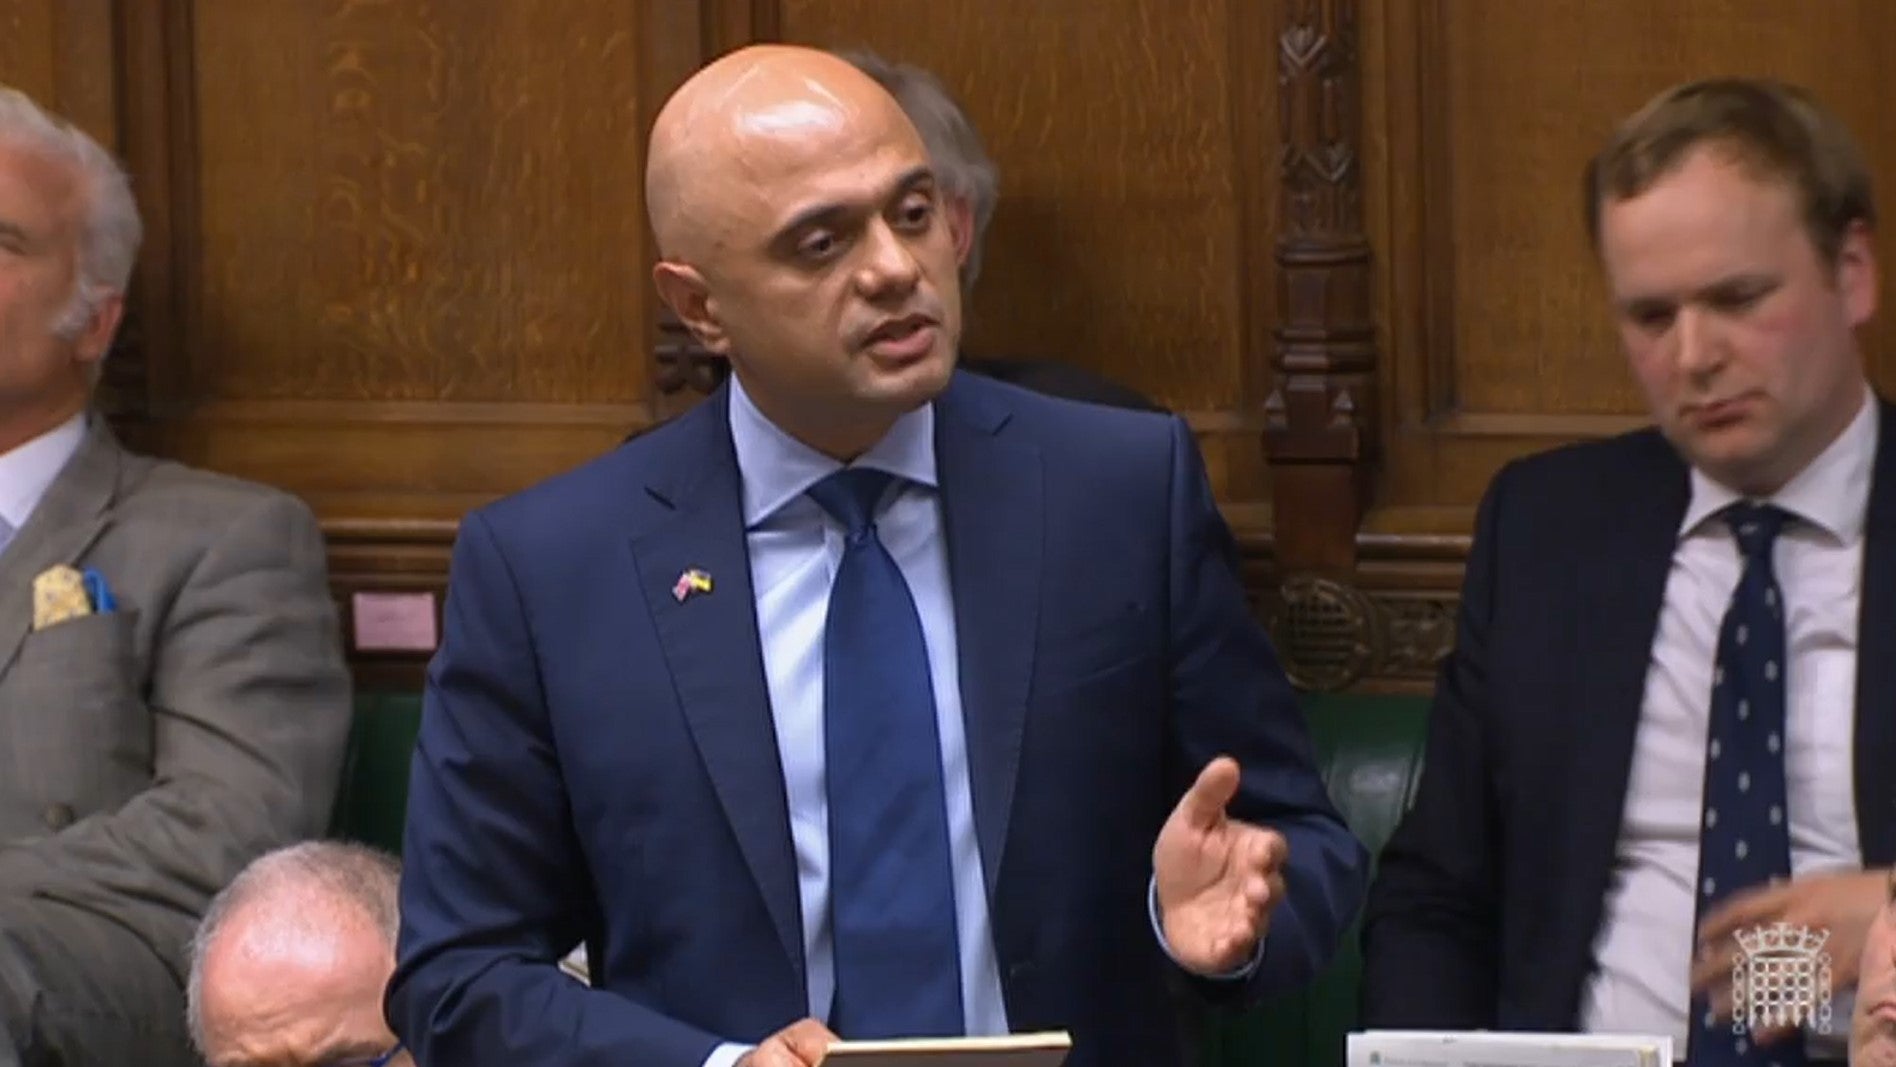 Former health secretary Sajid Javid delivers a personal statement to MPs (House of Commons/PA)